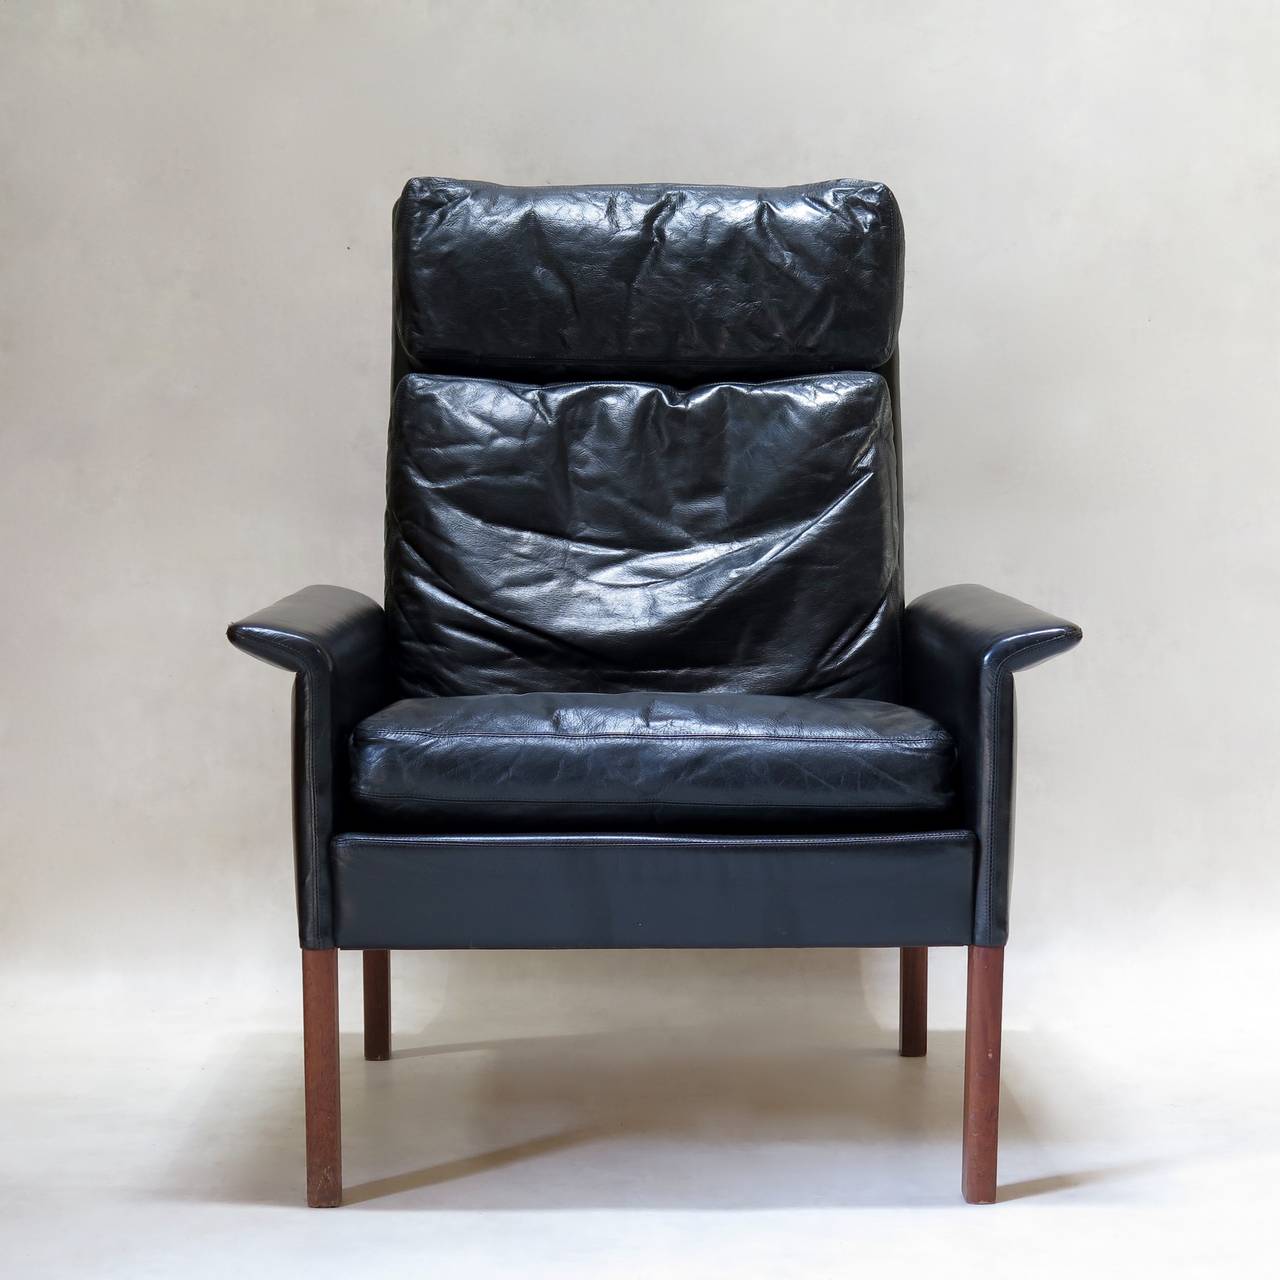 Handsome and comfortable pair of black leather-upholstered armchairs, with outwardly-turned armrests, raised on rosewood legs. 
Sleek design by Danish designer Hans Olsen for C.S. Møbler.
Stamped by the 